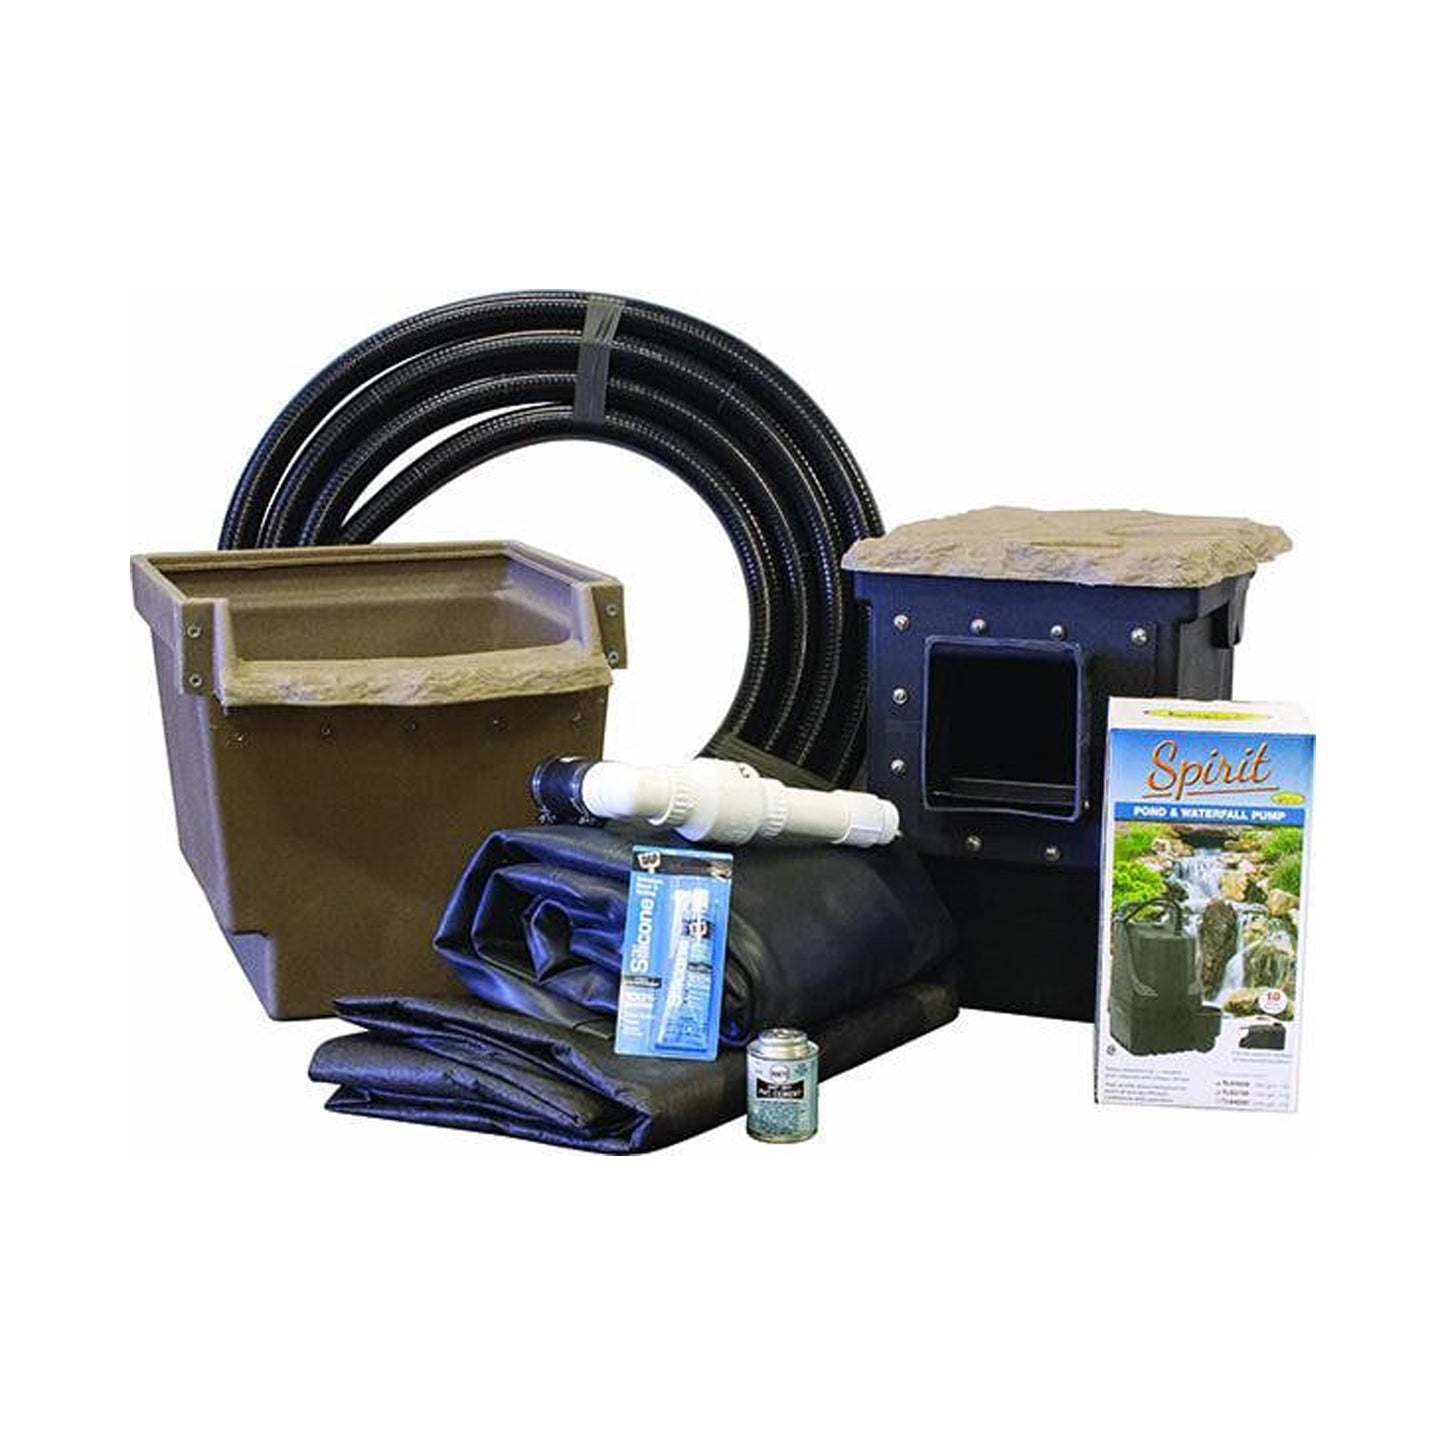 Pro-Series Mini Pond Kit - Complete for 6' X 6' Pond - Living Water Aeration